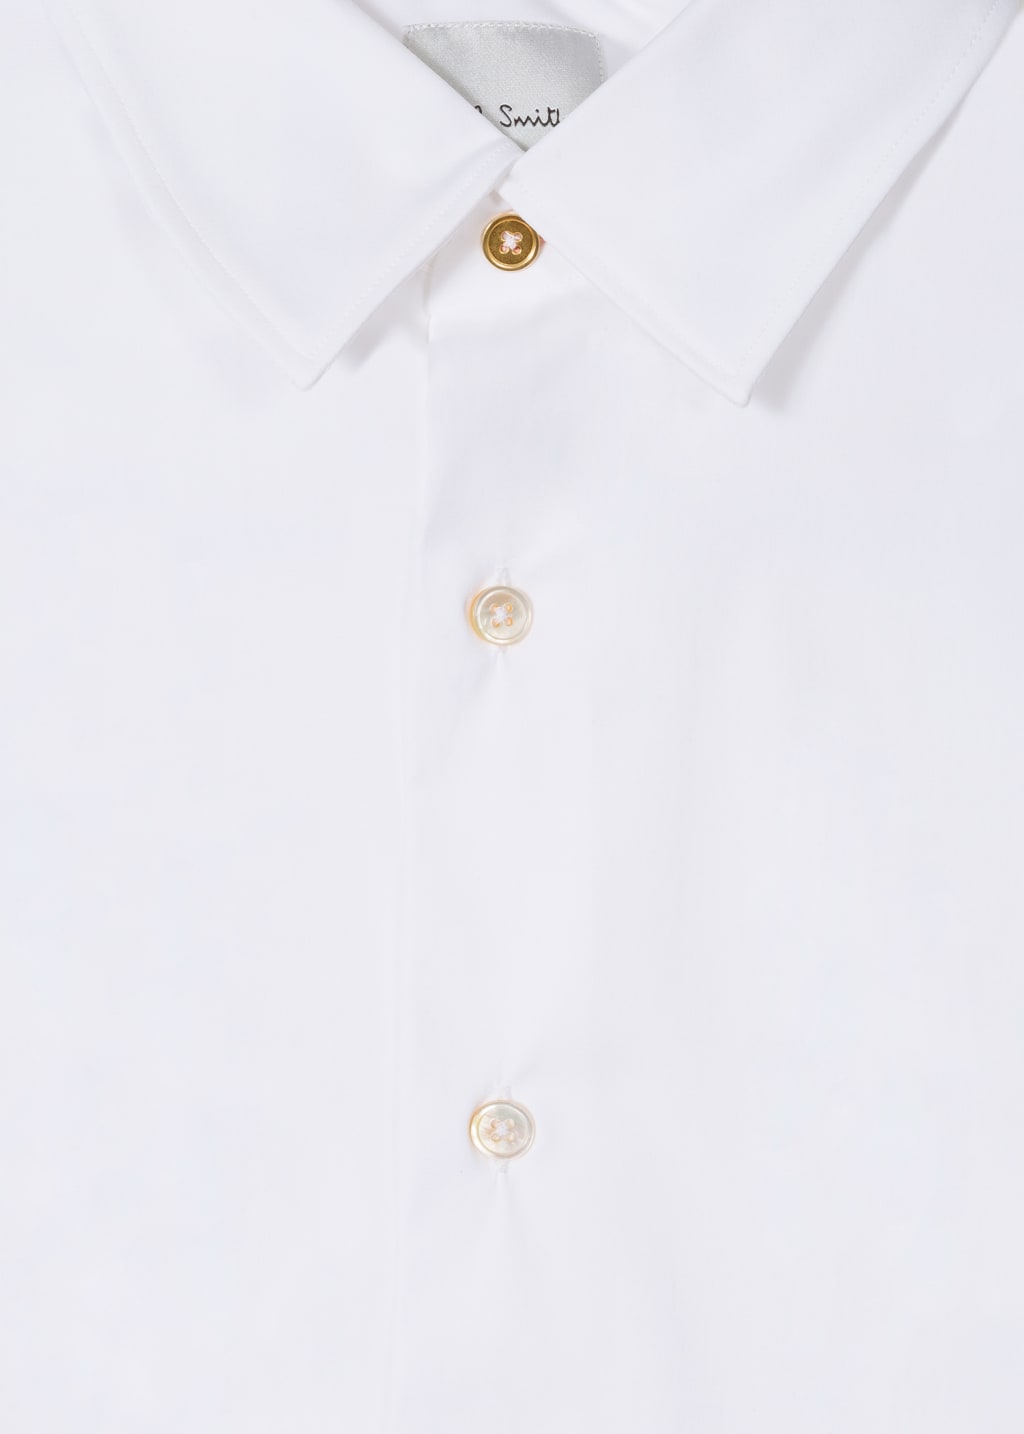 Detail View - Super Slim-Fit White Shirt With 'Artist Stripe' Cuff Lining Paul Smith